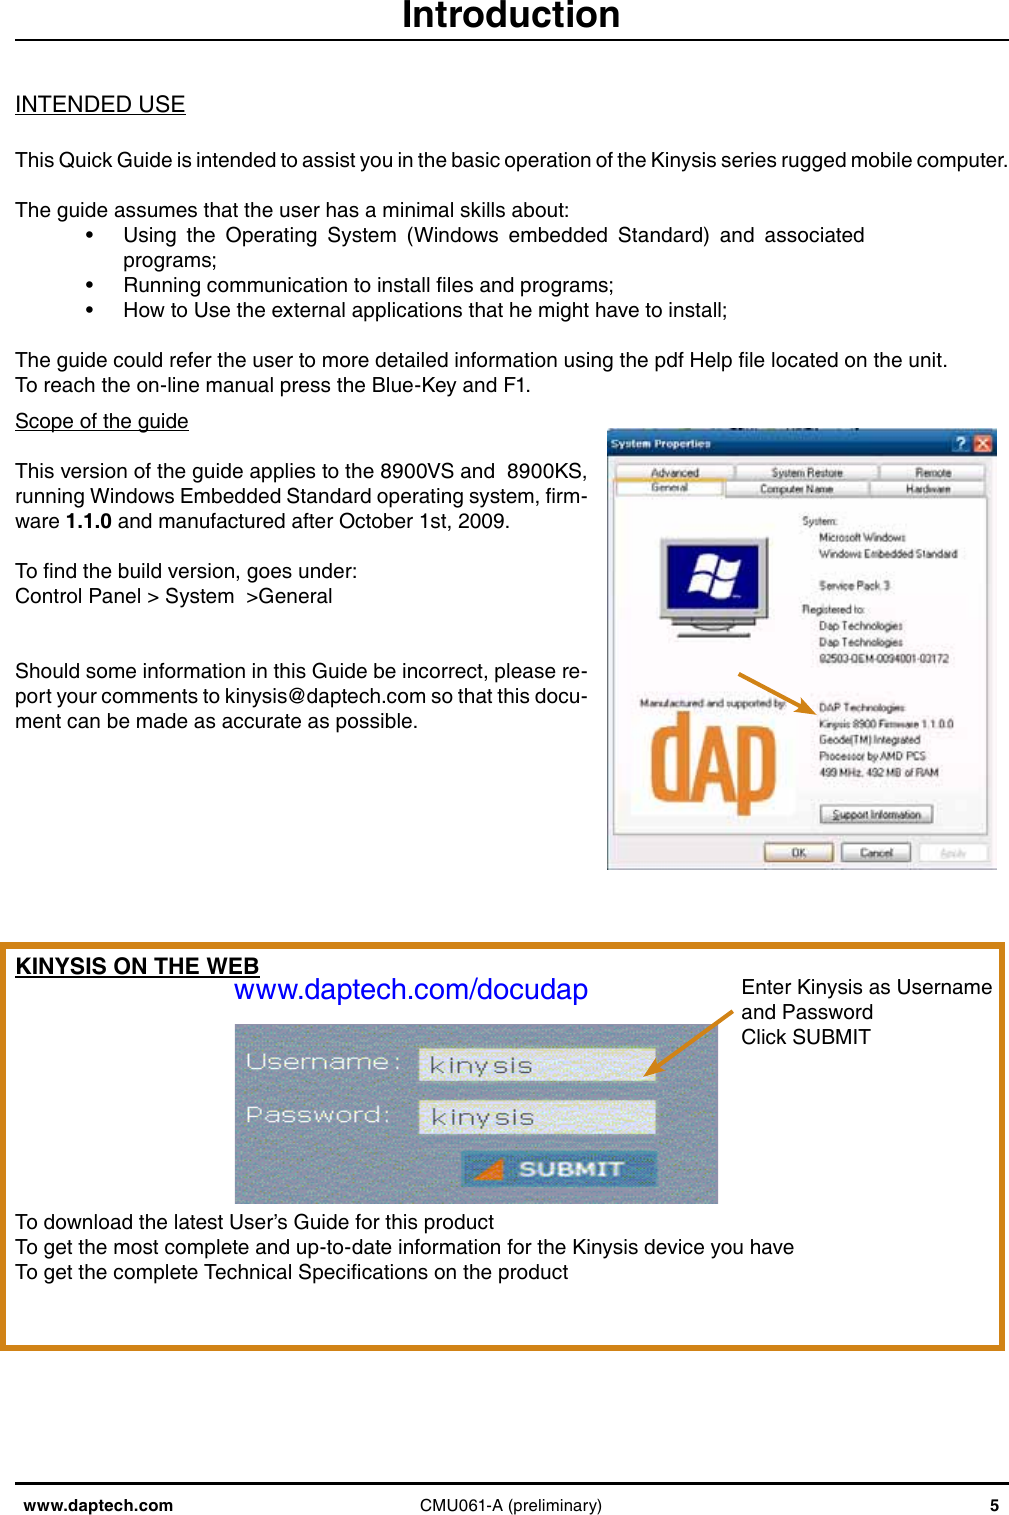 www.daptech.com CMU061-A (preliminary) 5IntroductionScope of the guideThis version of the guide applies to the 8900VS and  8900KS, running Windows Embedded Standard operating system, rm-ware 1.1.0 and manufactured after October 1st, 2009.To nd the build version, goes under: Control Panel &gt; System  &gt;General Should some information in this Guide be incorrect, please re-port your comments to kinysis@daptech.com so that this docu-ment can be made as accurate as possible.INTENDED USEThis Quick Guide is intended to assist you in the basic operation of the Kinysis series rugged mobile computer. The guide assumes that the user has a minimal skills about:•  Using  the  Operating  System  (Windows  embedded  Standard)  and  associated programs;•  Running communication to install les and programs;•  How to Use the external applications that he might have to install;The guide could refer the user to more detailed information using the pdf Help le located on the unit.To reach the on-line manual press the Blue-Key and F1.KINYSIS ON THE WEBwww.daptech.com/docudapTo download the latest User’s Guide for this productTo get the most complete and up-to-date information for the Kinysis device you haveTo get the complete Technical Specications on the productEnter Kinysis as Usernameand PasswordClick SUBMIT